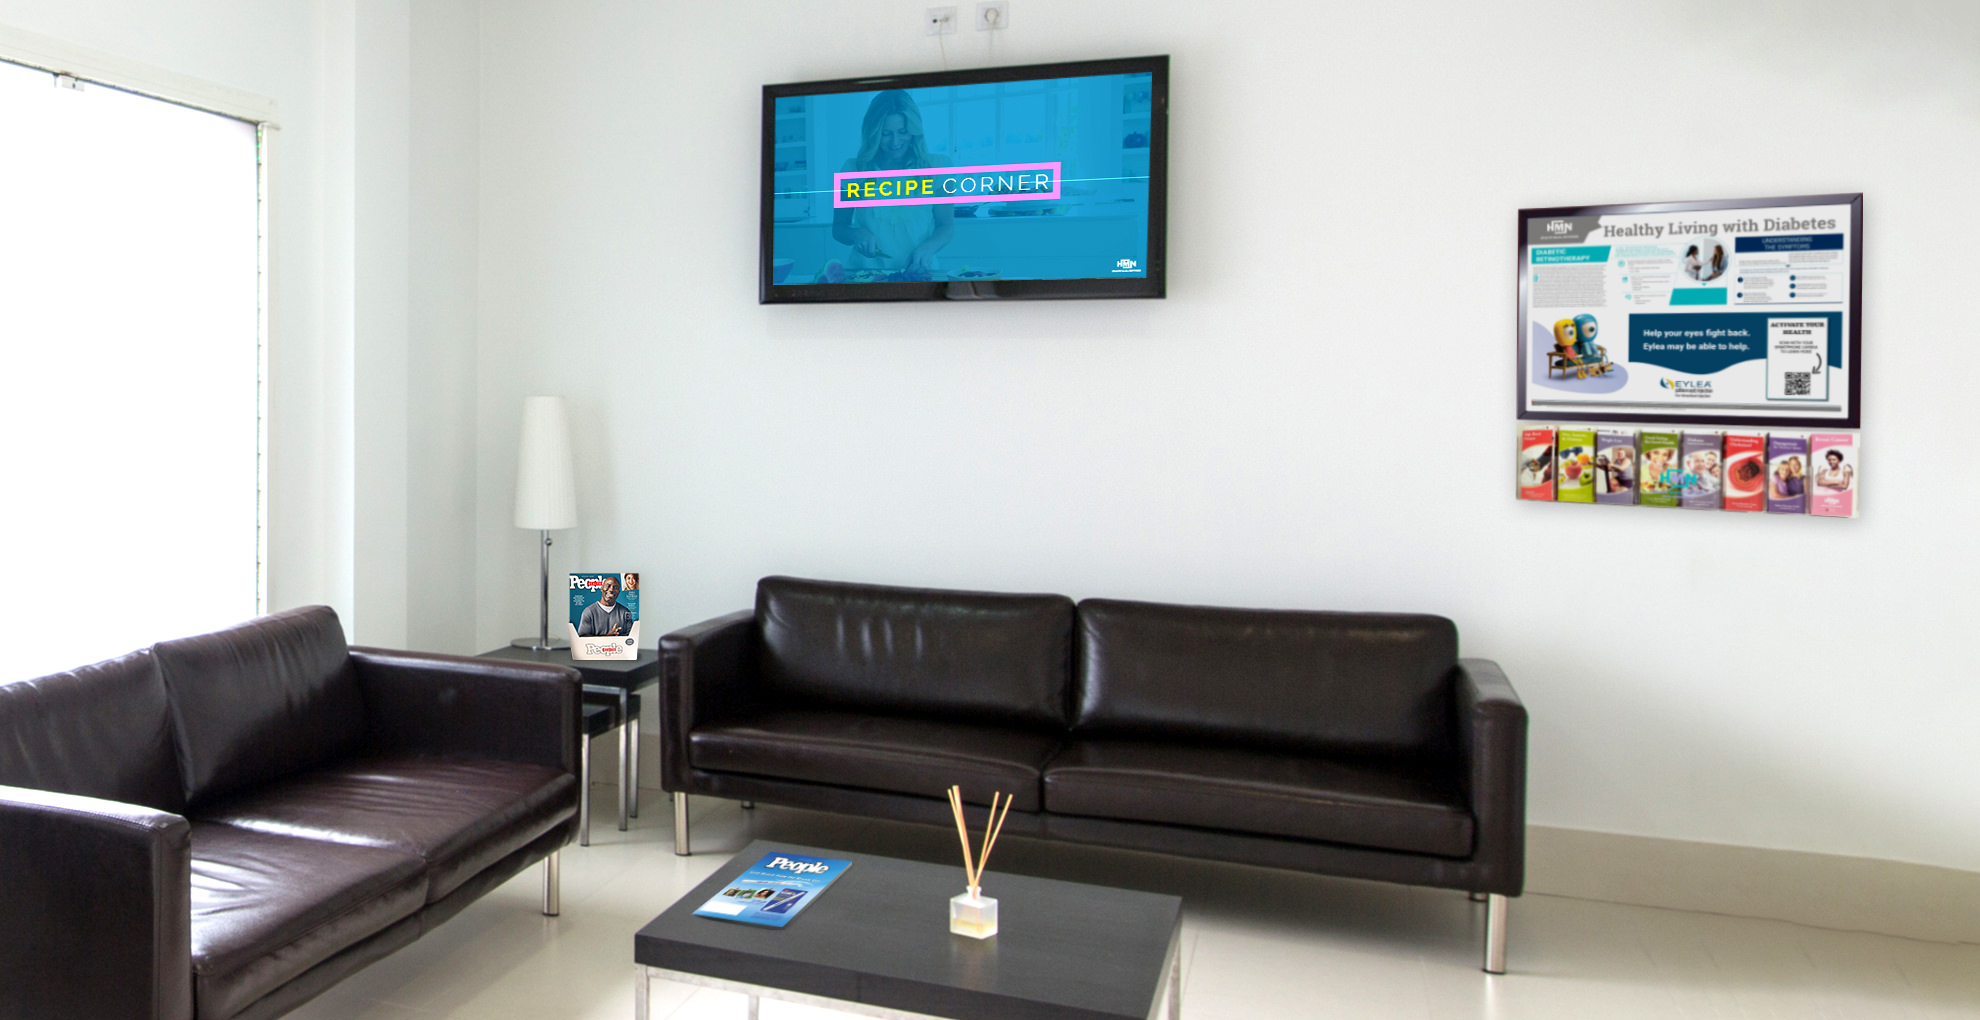 Digital TV Network - Elevate the waiting room experience with best-in-class video content. Standard and custom ad units, contextual adjacencies, sponsorships & custom content.